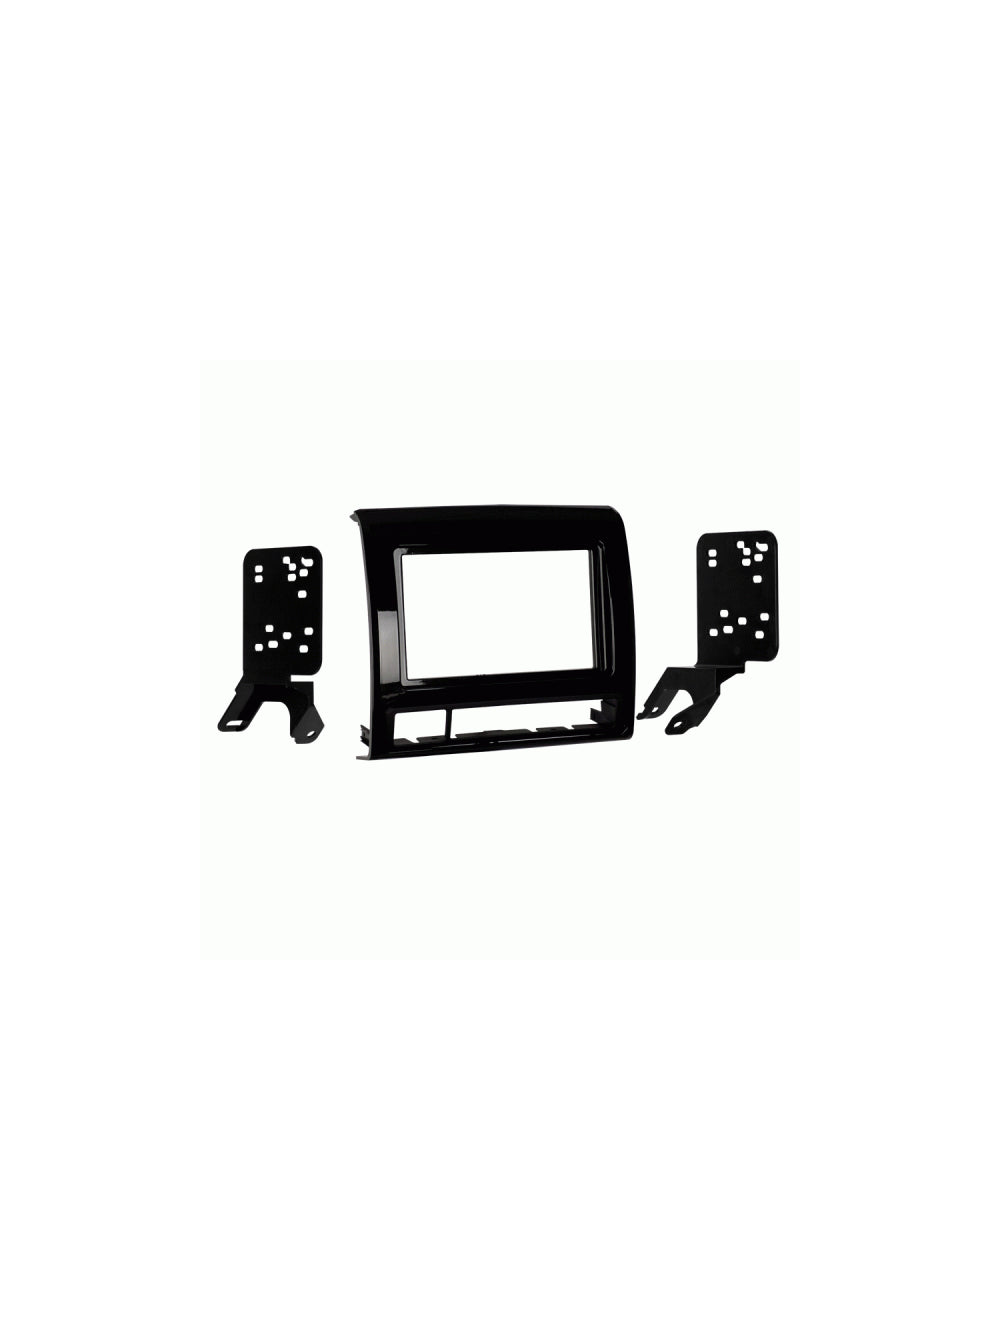 Metra 95-8235CHG Double DIN Dash Installation Kit for 2012-Up Toyota Tacoma Vehicles Charcoal High Gloss